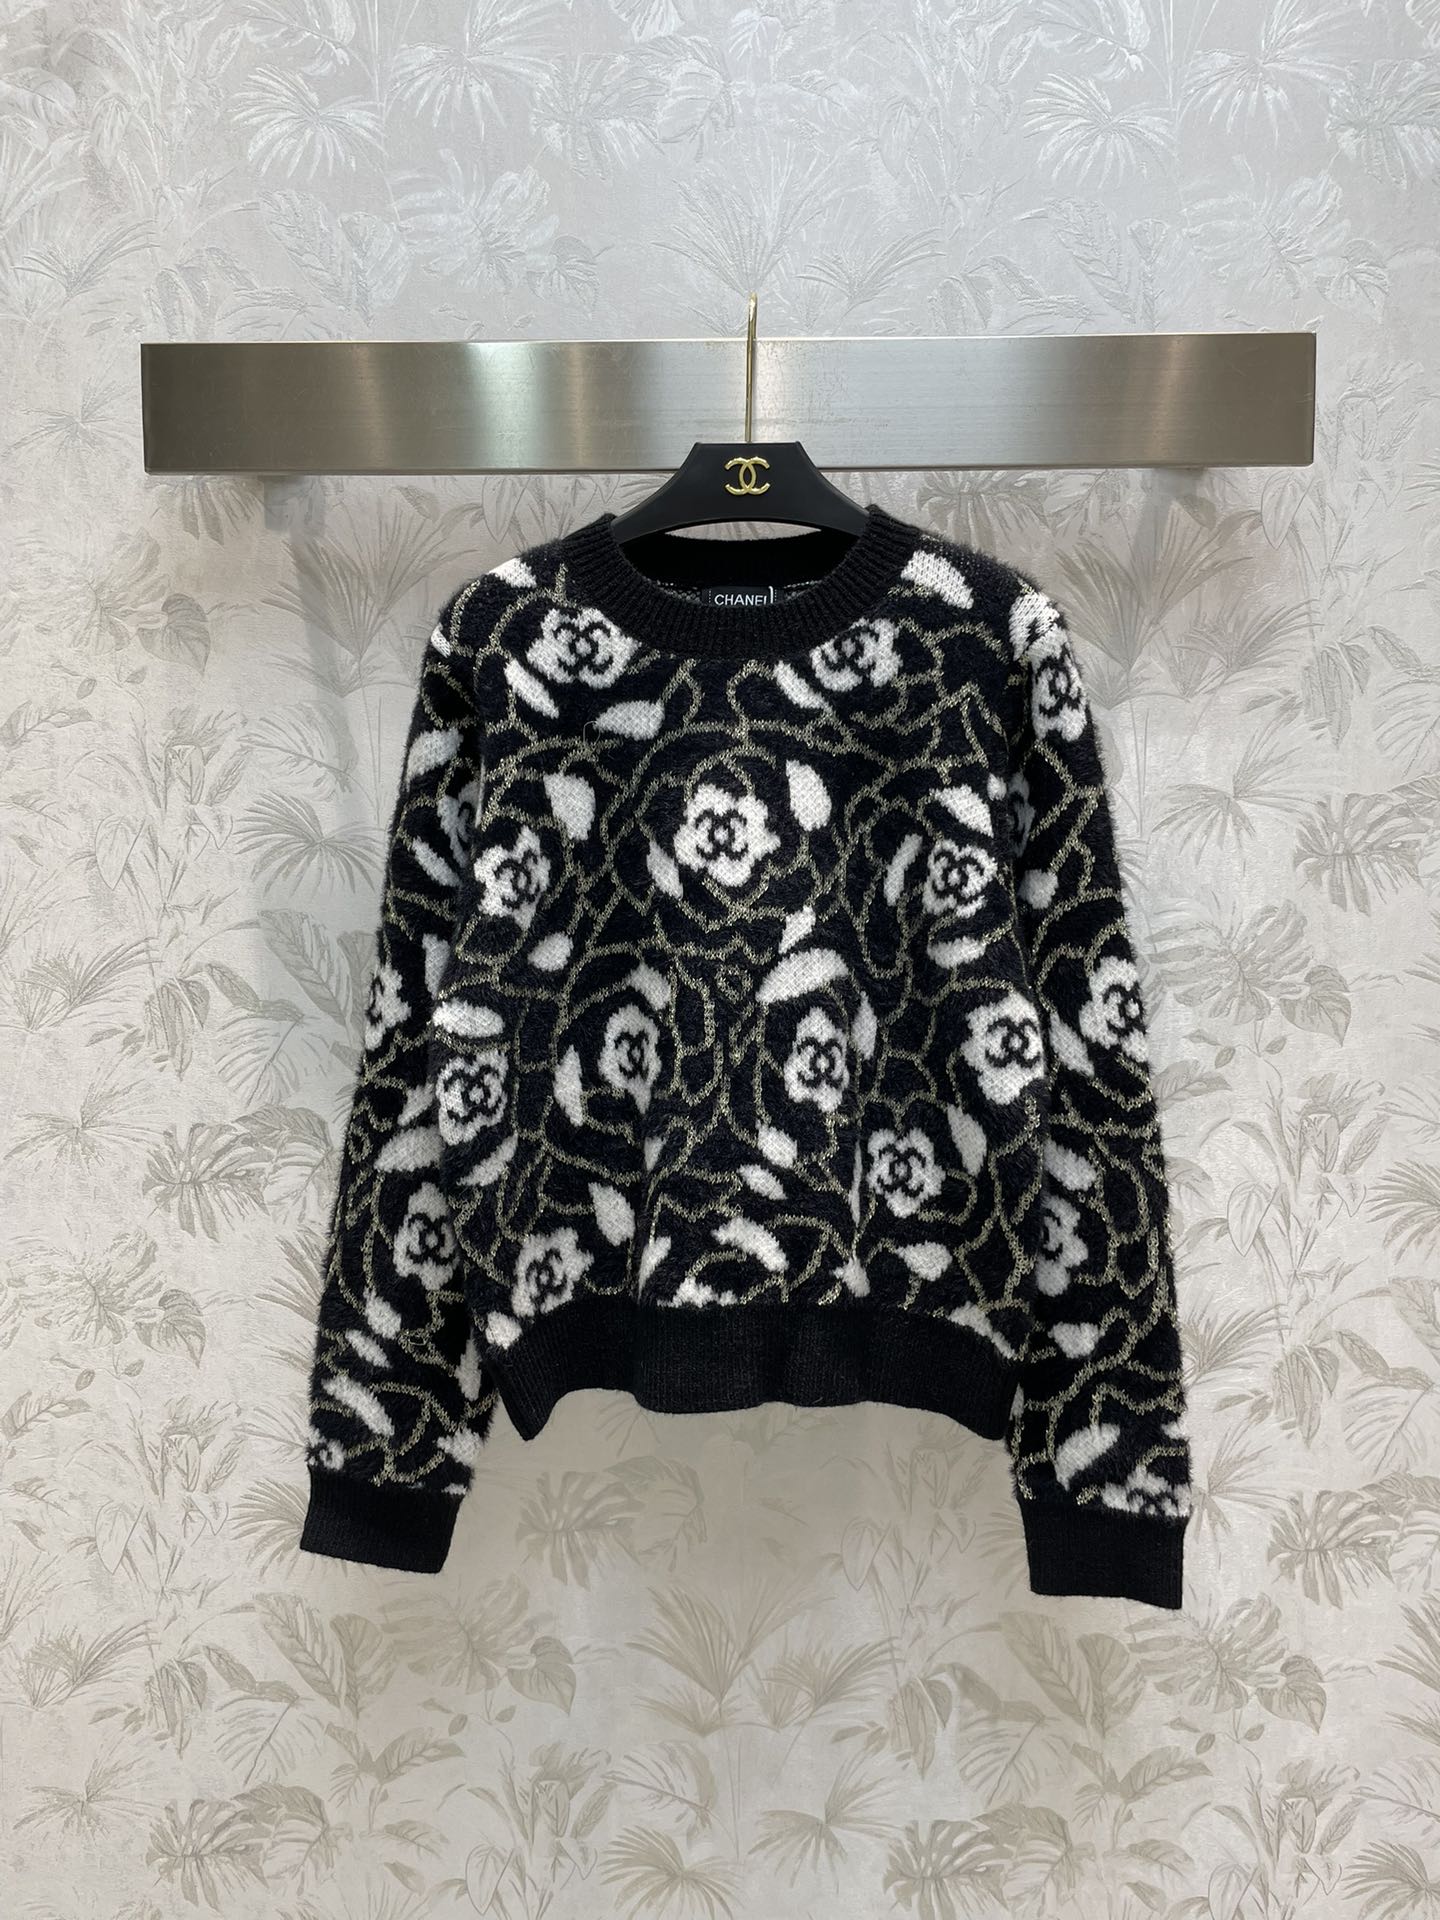 Chanel Clothing Sweatshirts Buying Replica
 Black Gold White Cashmere Fall/Winter Collection Vintage